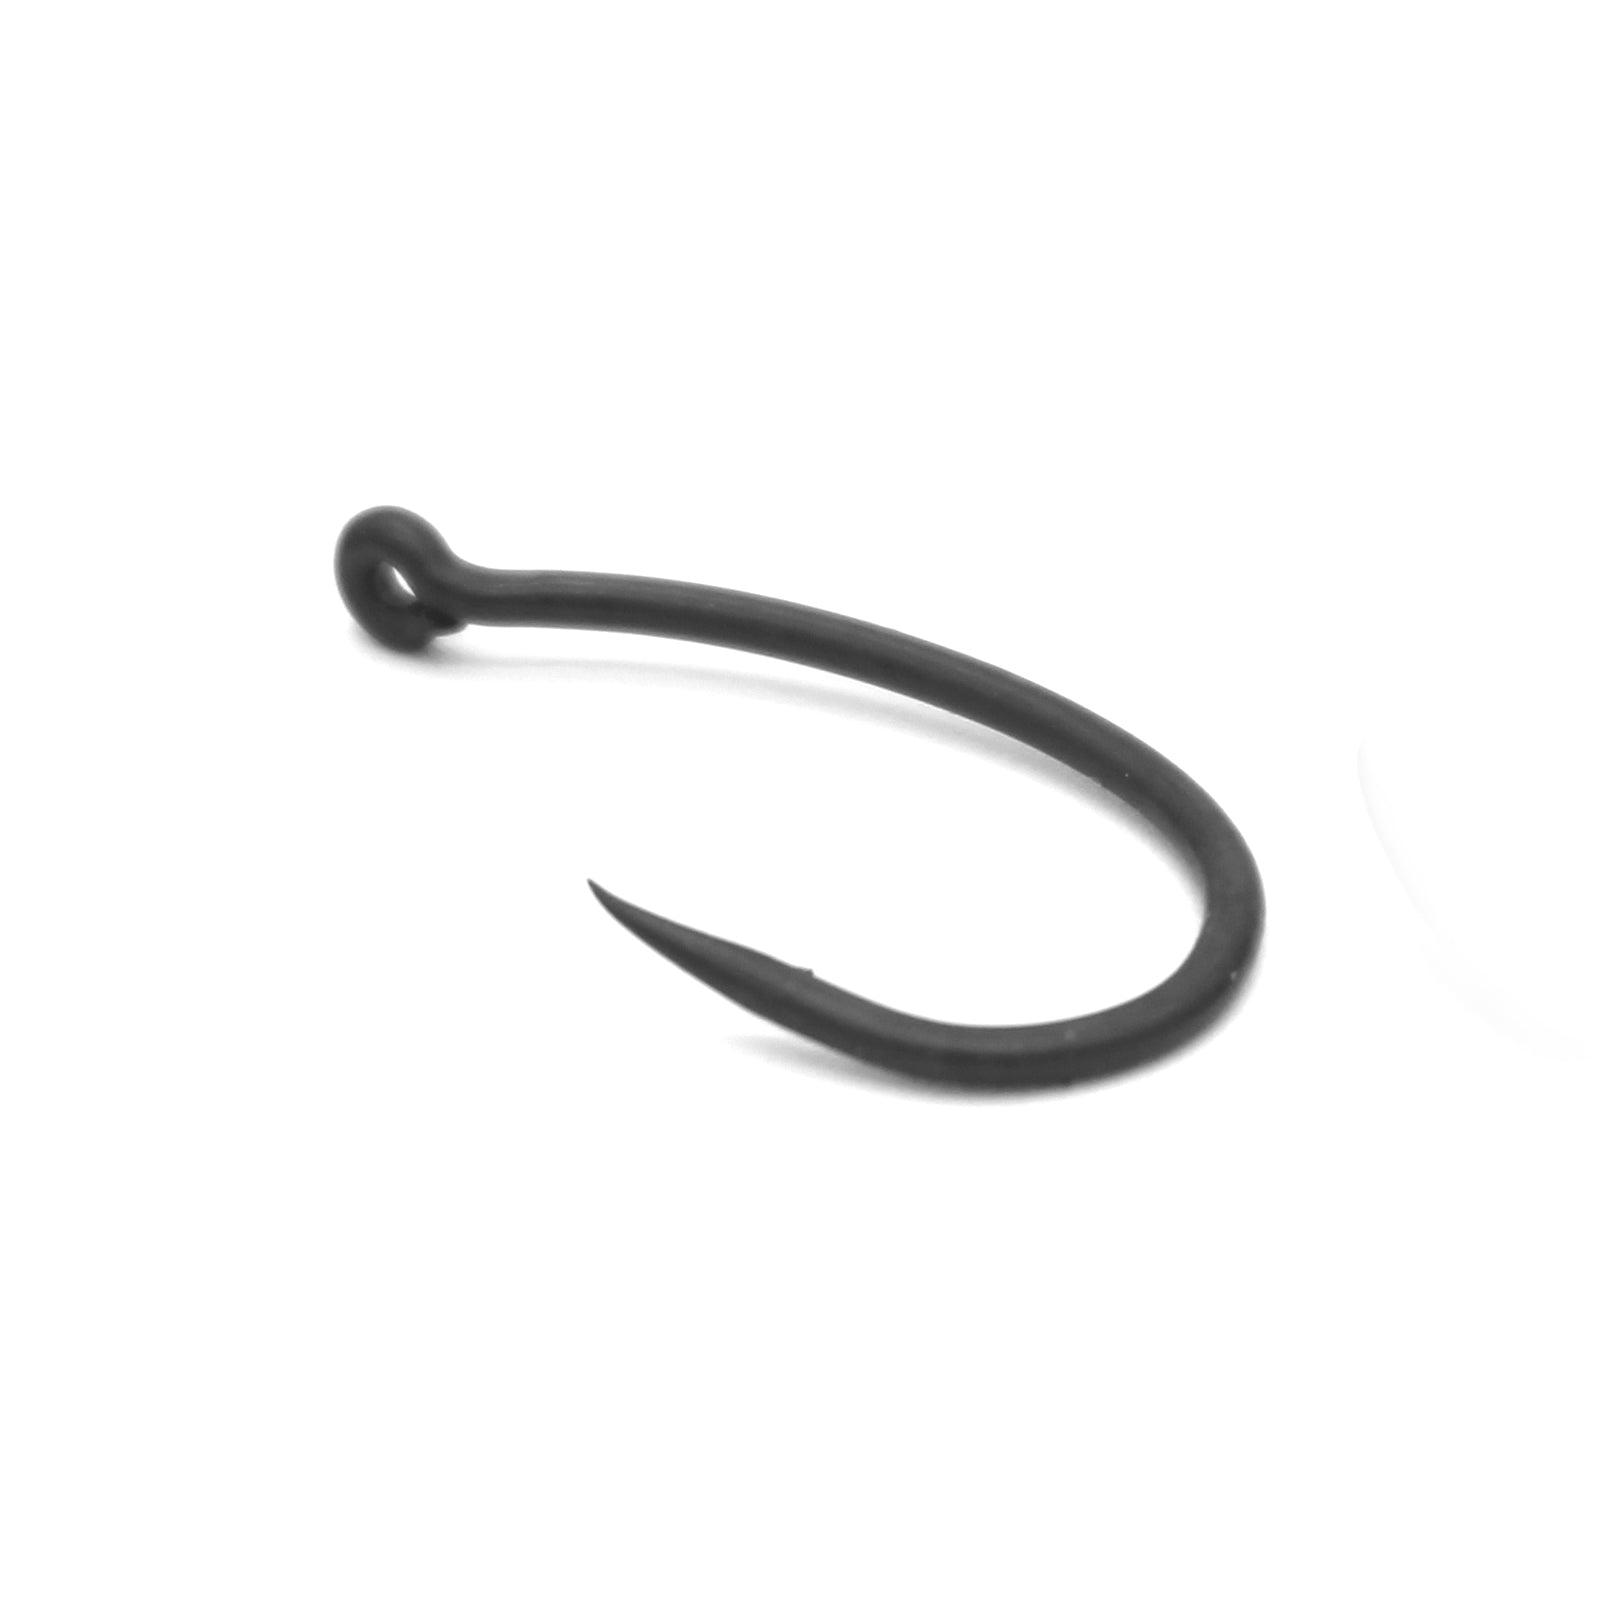 Deception Angling Chod CRK Micro Barbed Fishing Hook